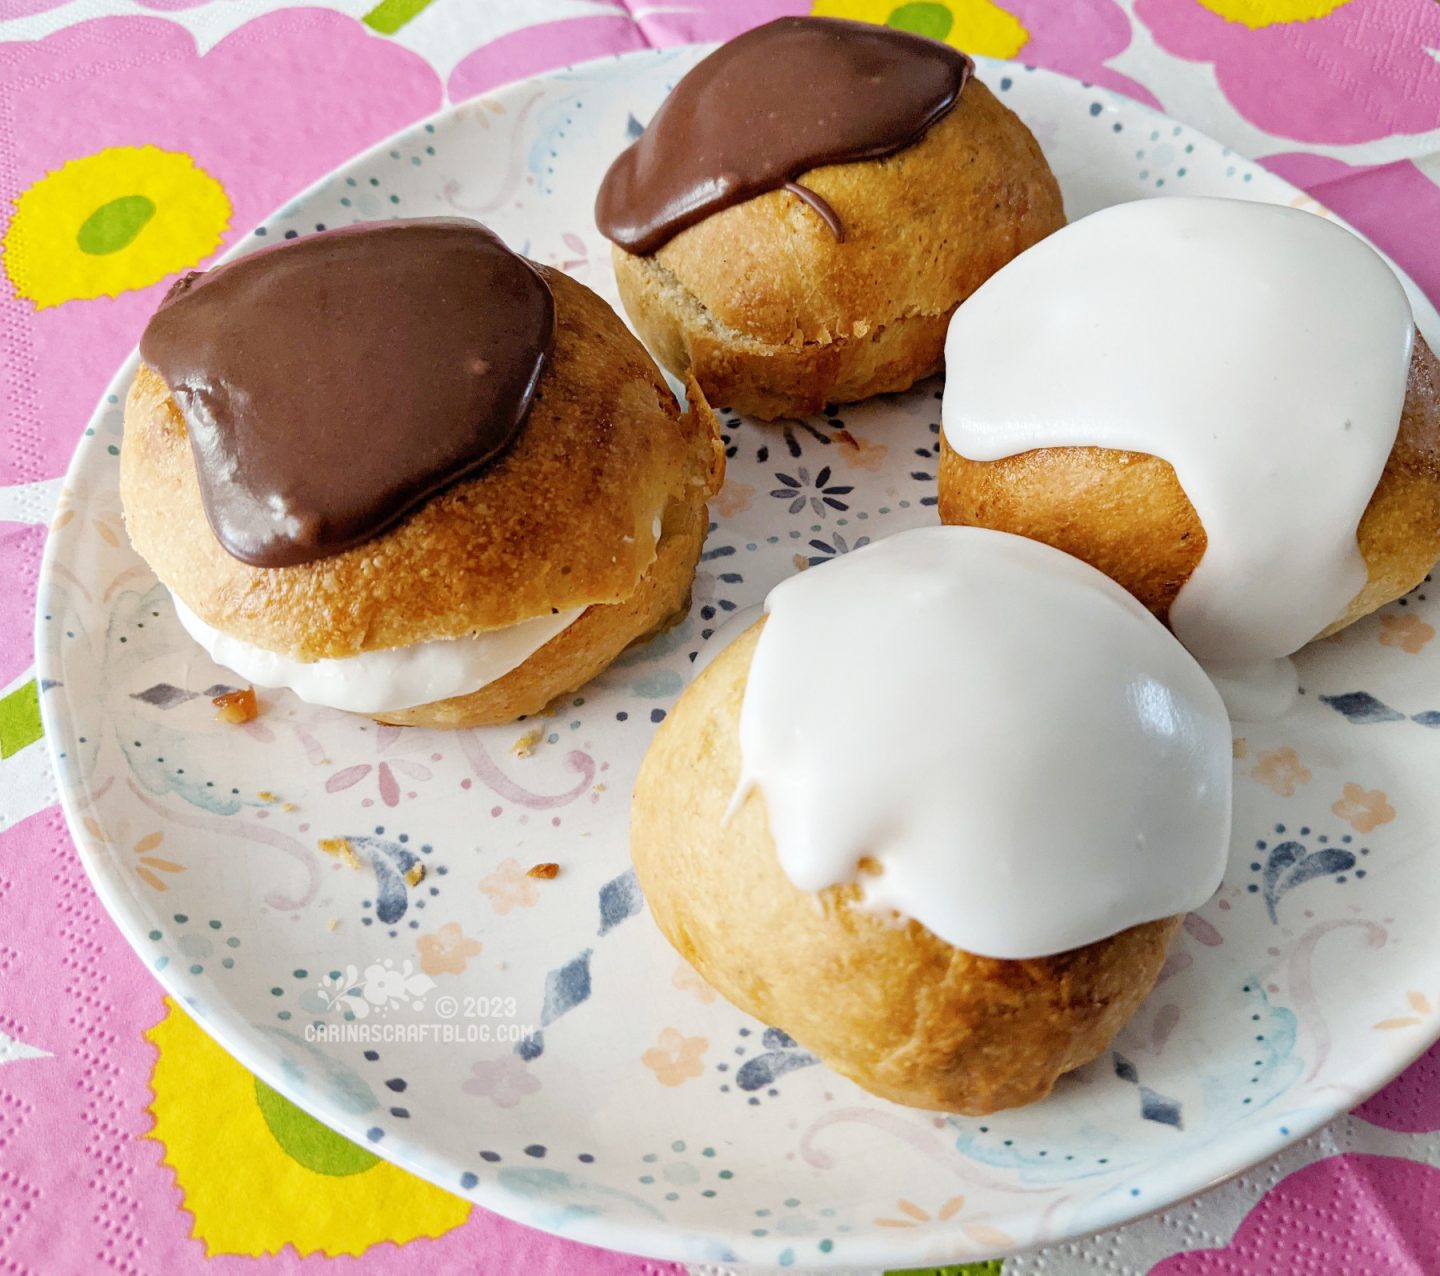 A white plate with a subtle pattern. On the plate are four buns decorated with icing sugar.